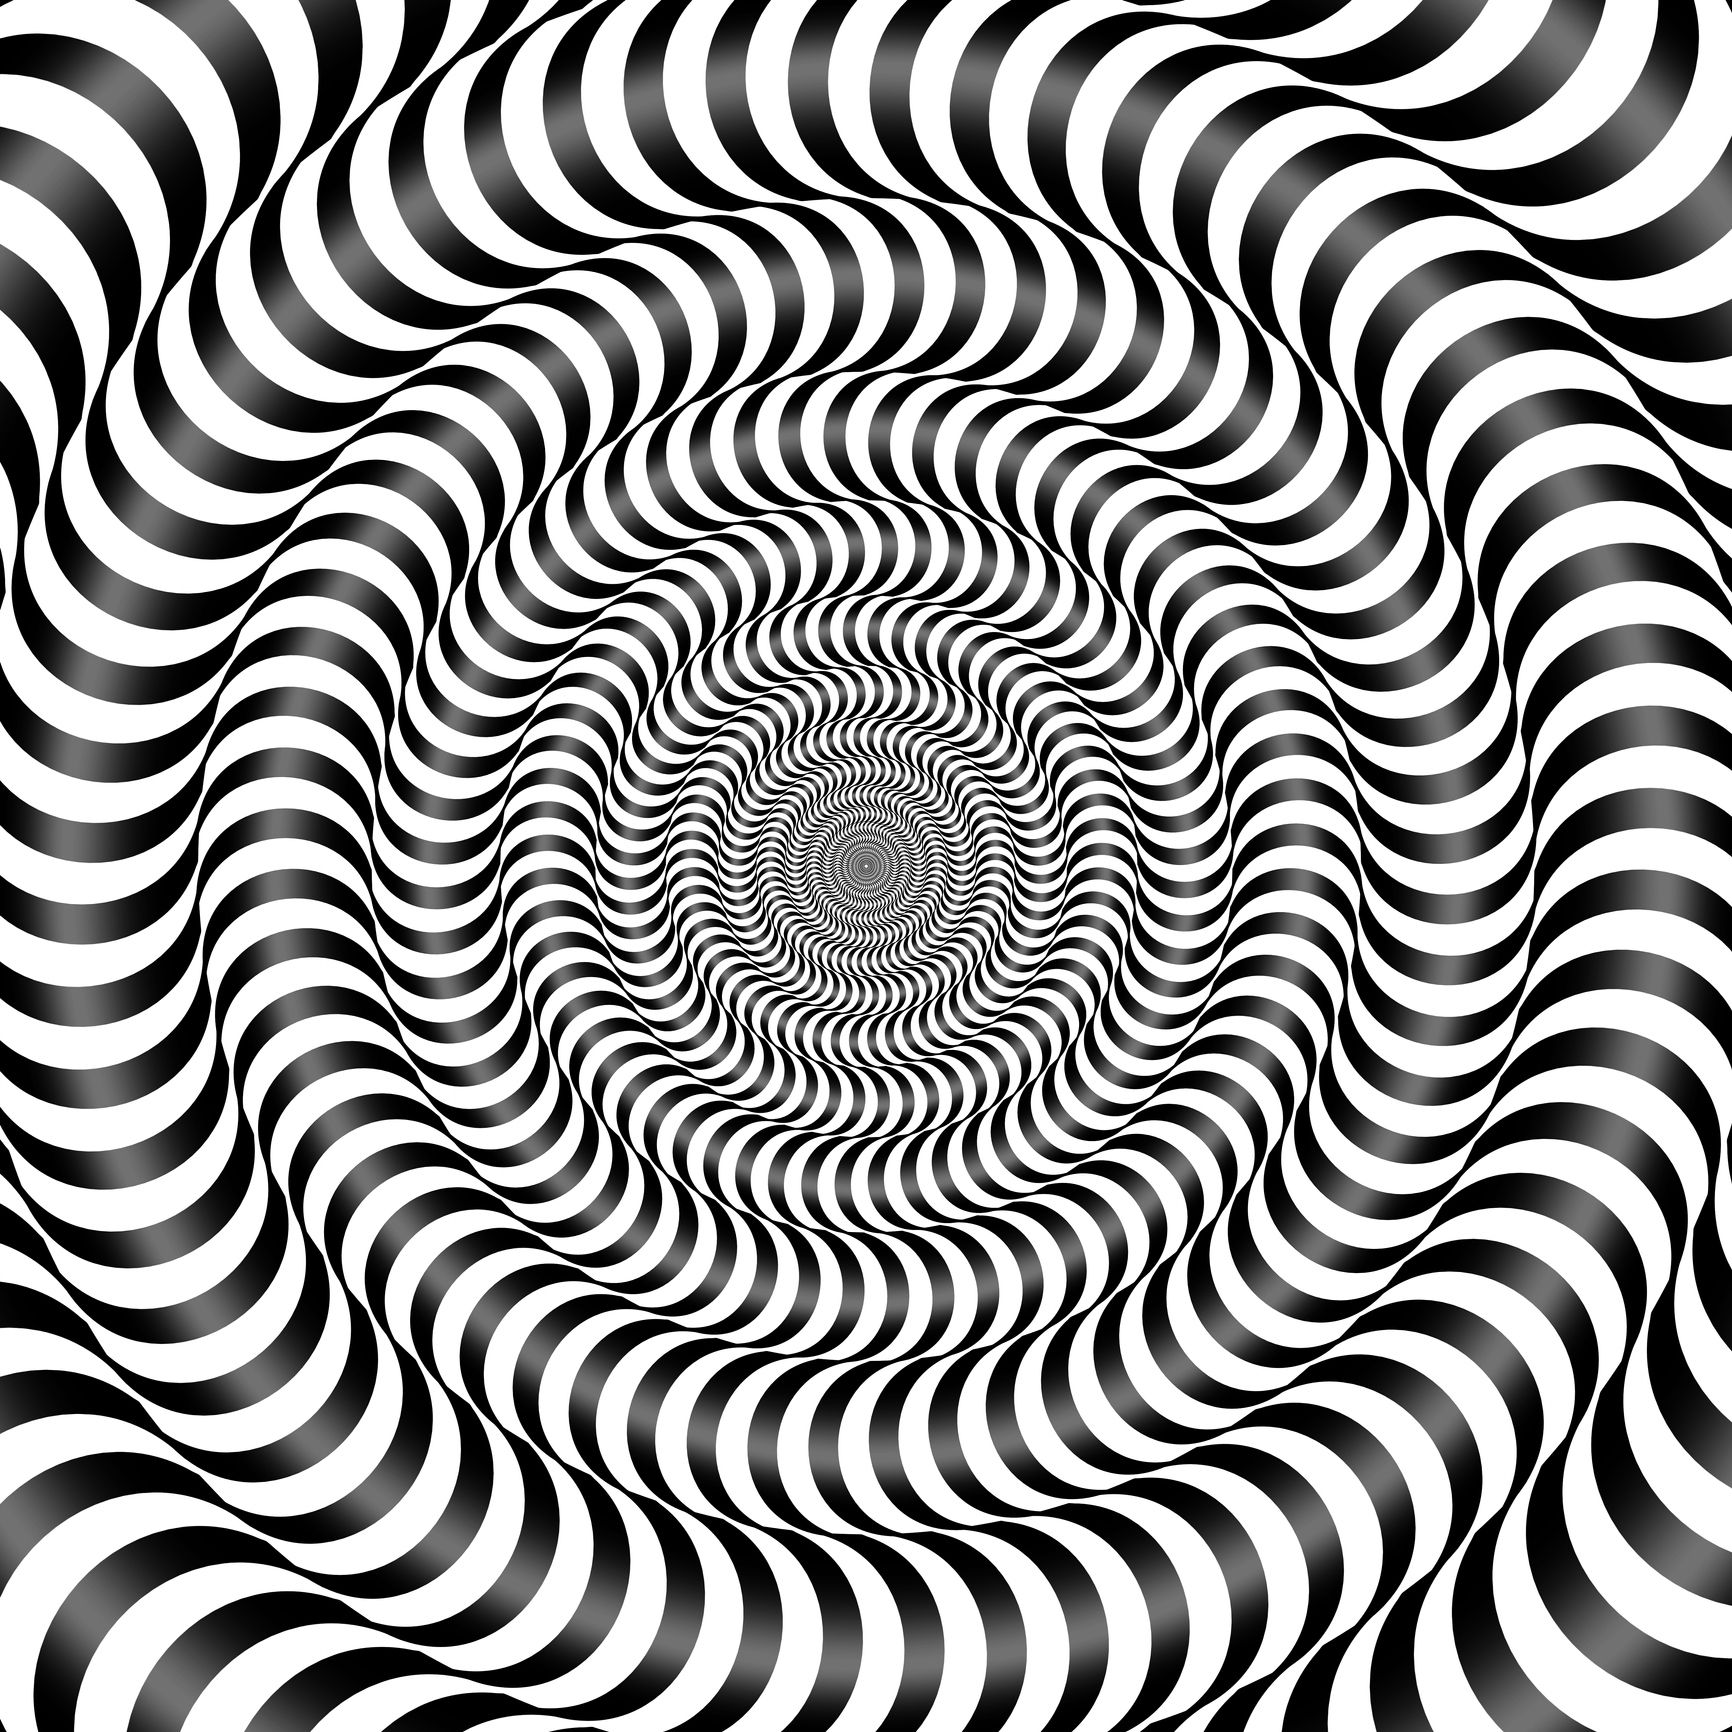 Illusion Wallpapers  Free by ZEDGE  Optical illusion wallpaper Cool optical  illusions Optical illusions